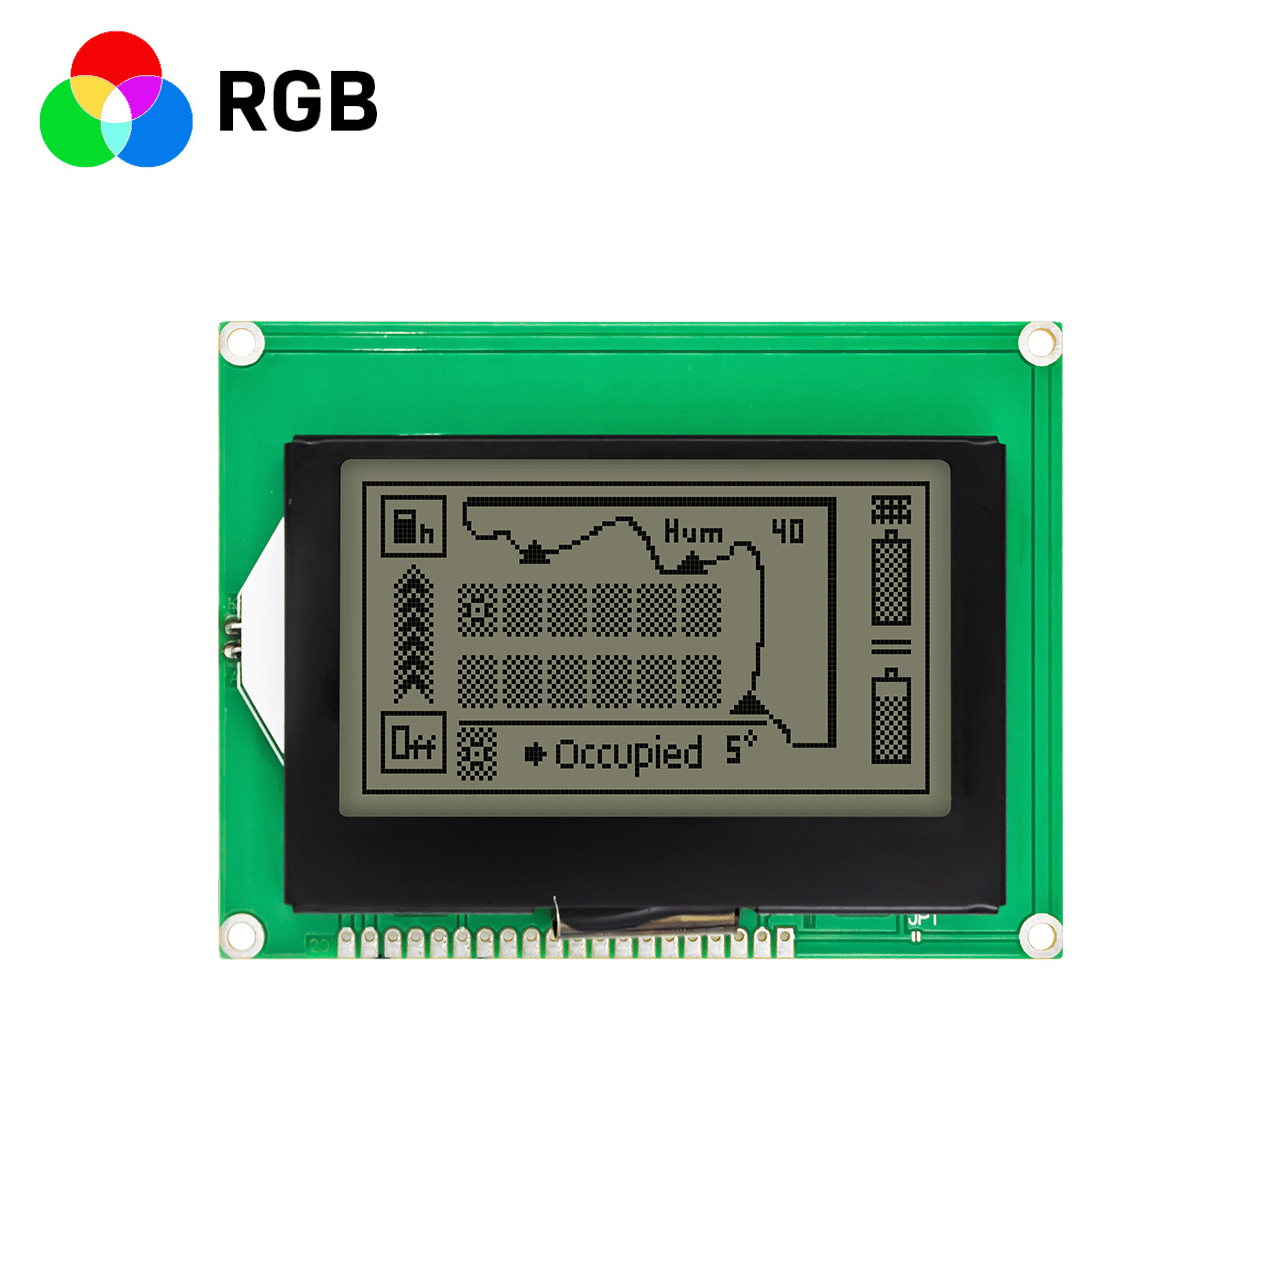 3-inch LCD graphic LCD module | 128x64 graphic dot matrix module | FSTN front display RGB red, green and blue backlight | fully transparent polarizer